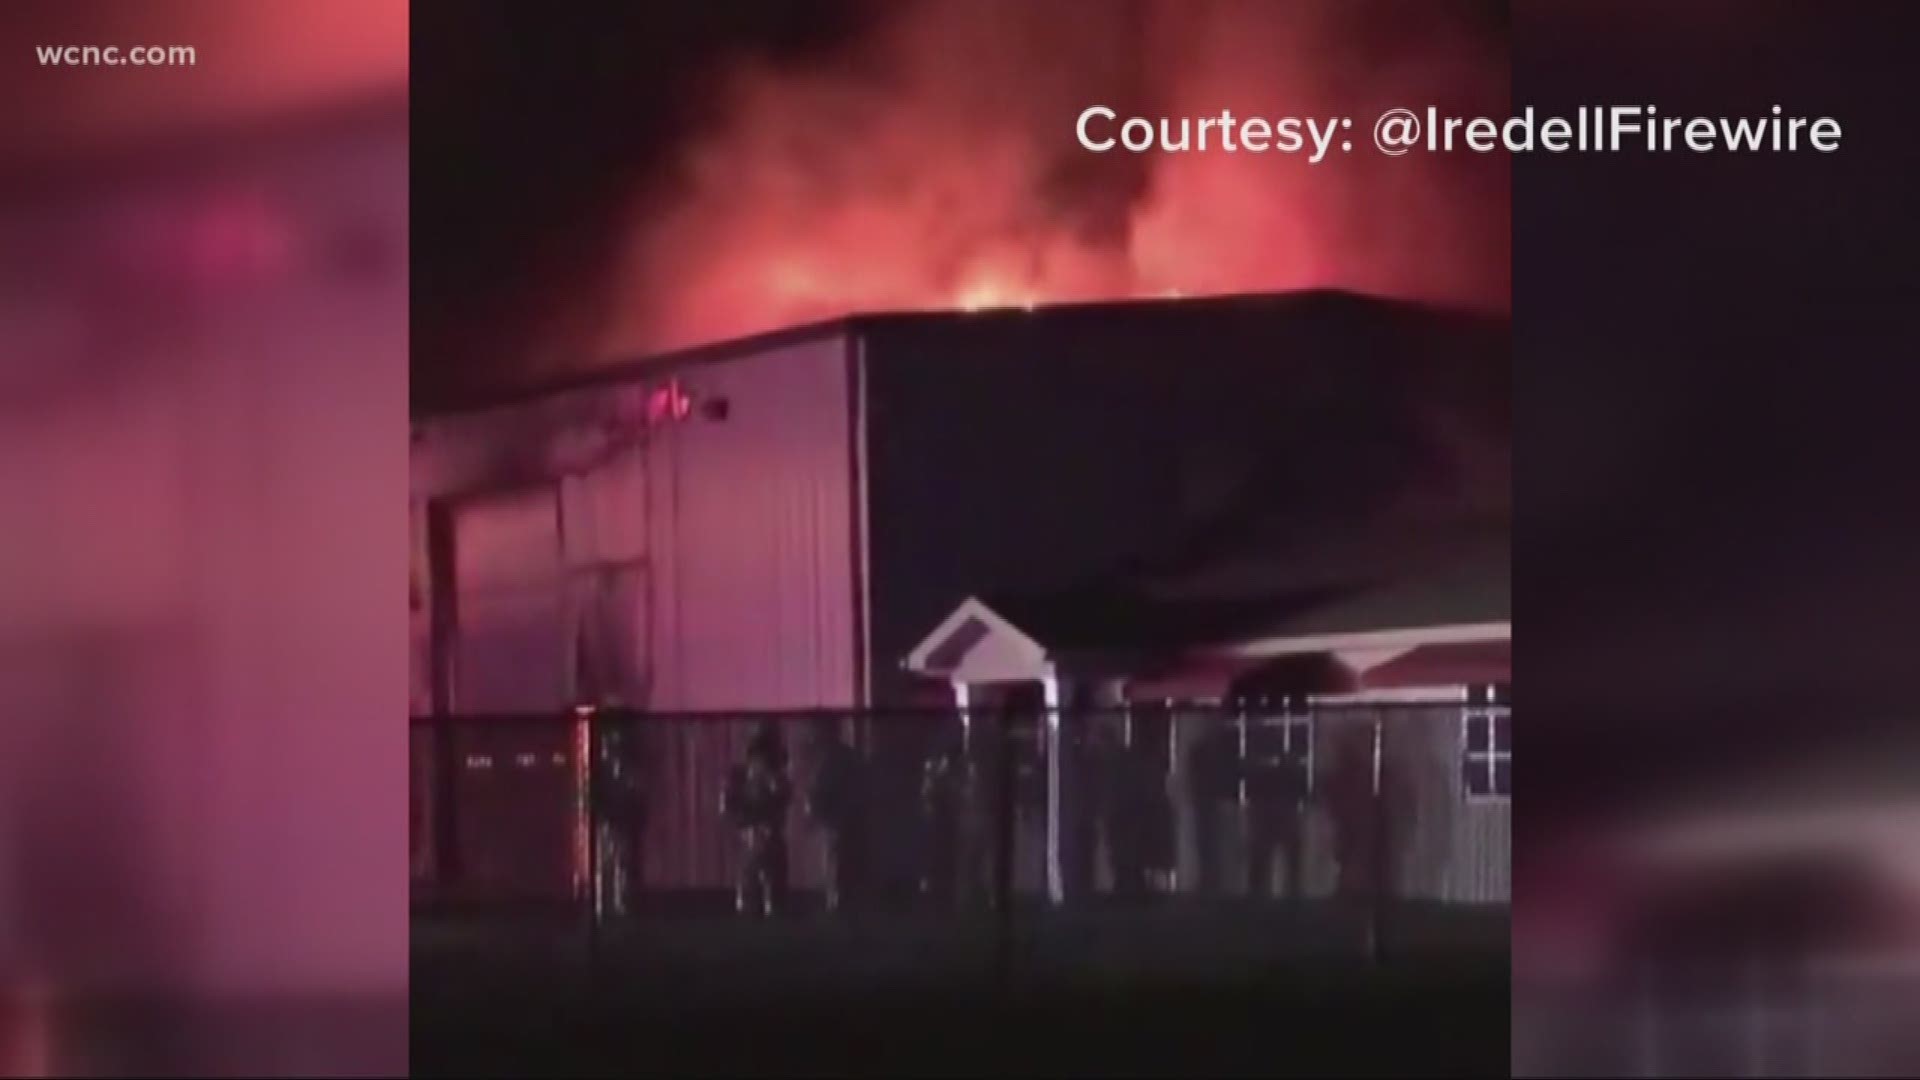 An overnight fire caused an estimated $1 million in damages to a warehouse in Iredell County.